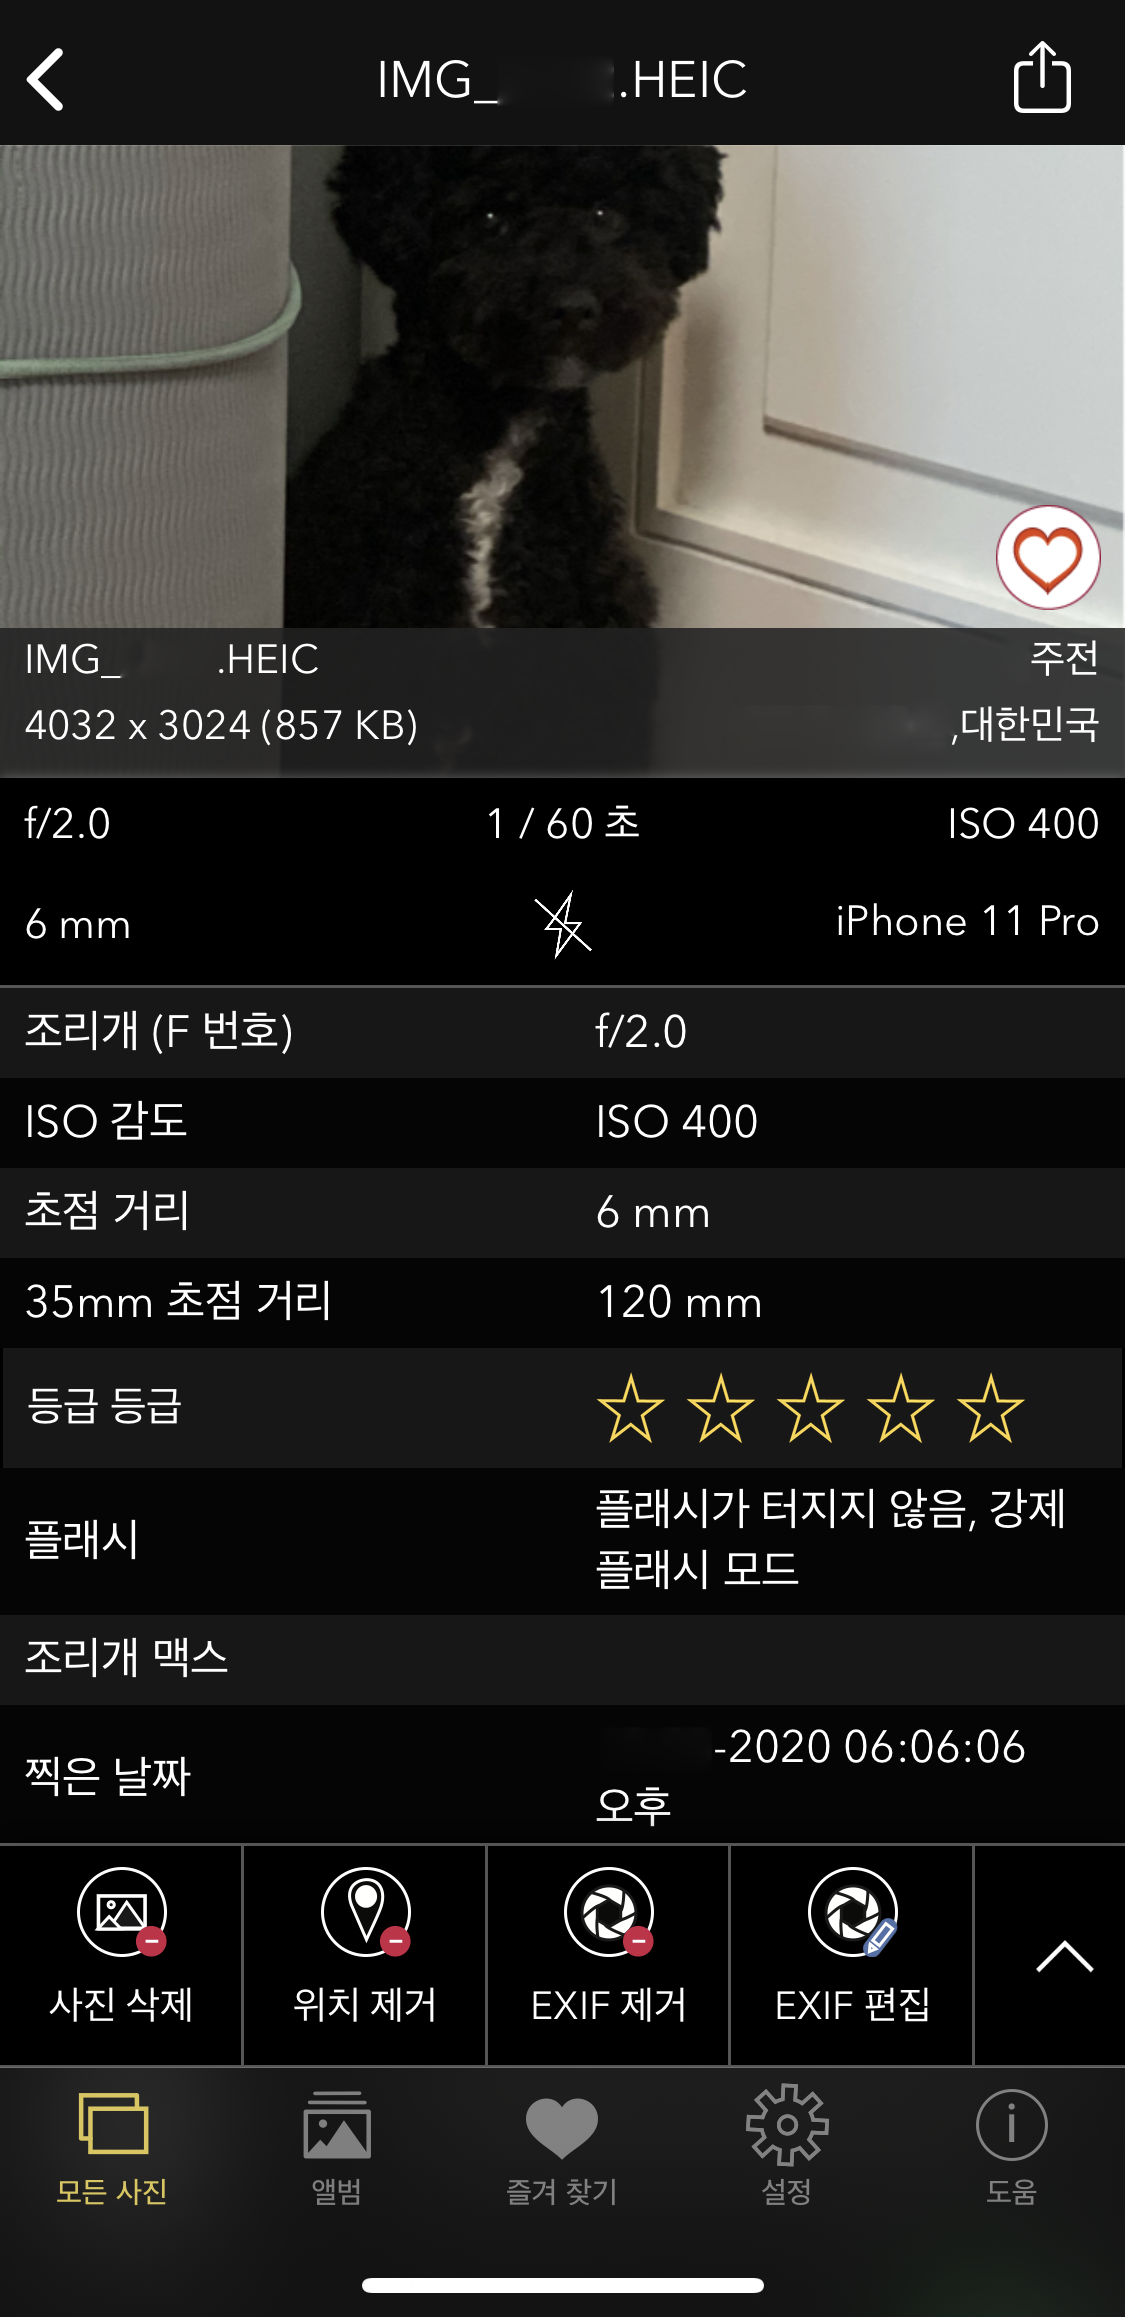 EXIF viewer - EXIF 보기